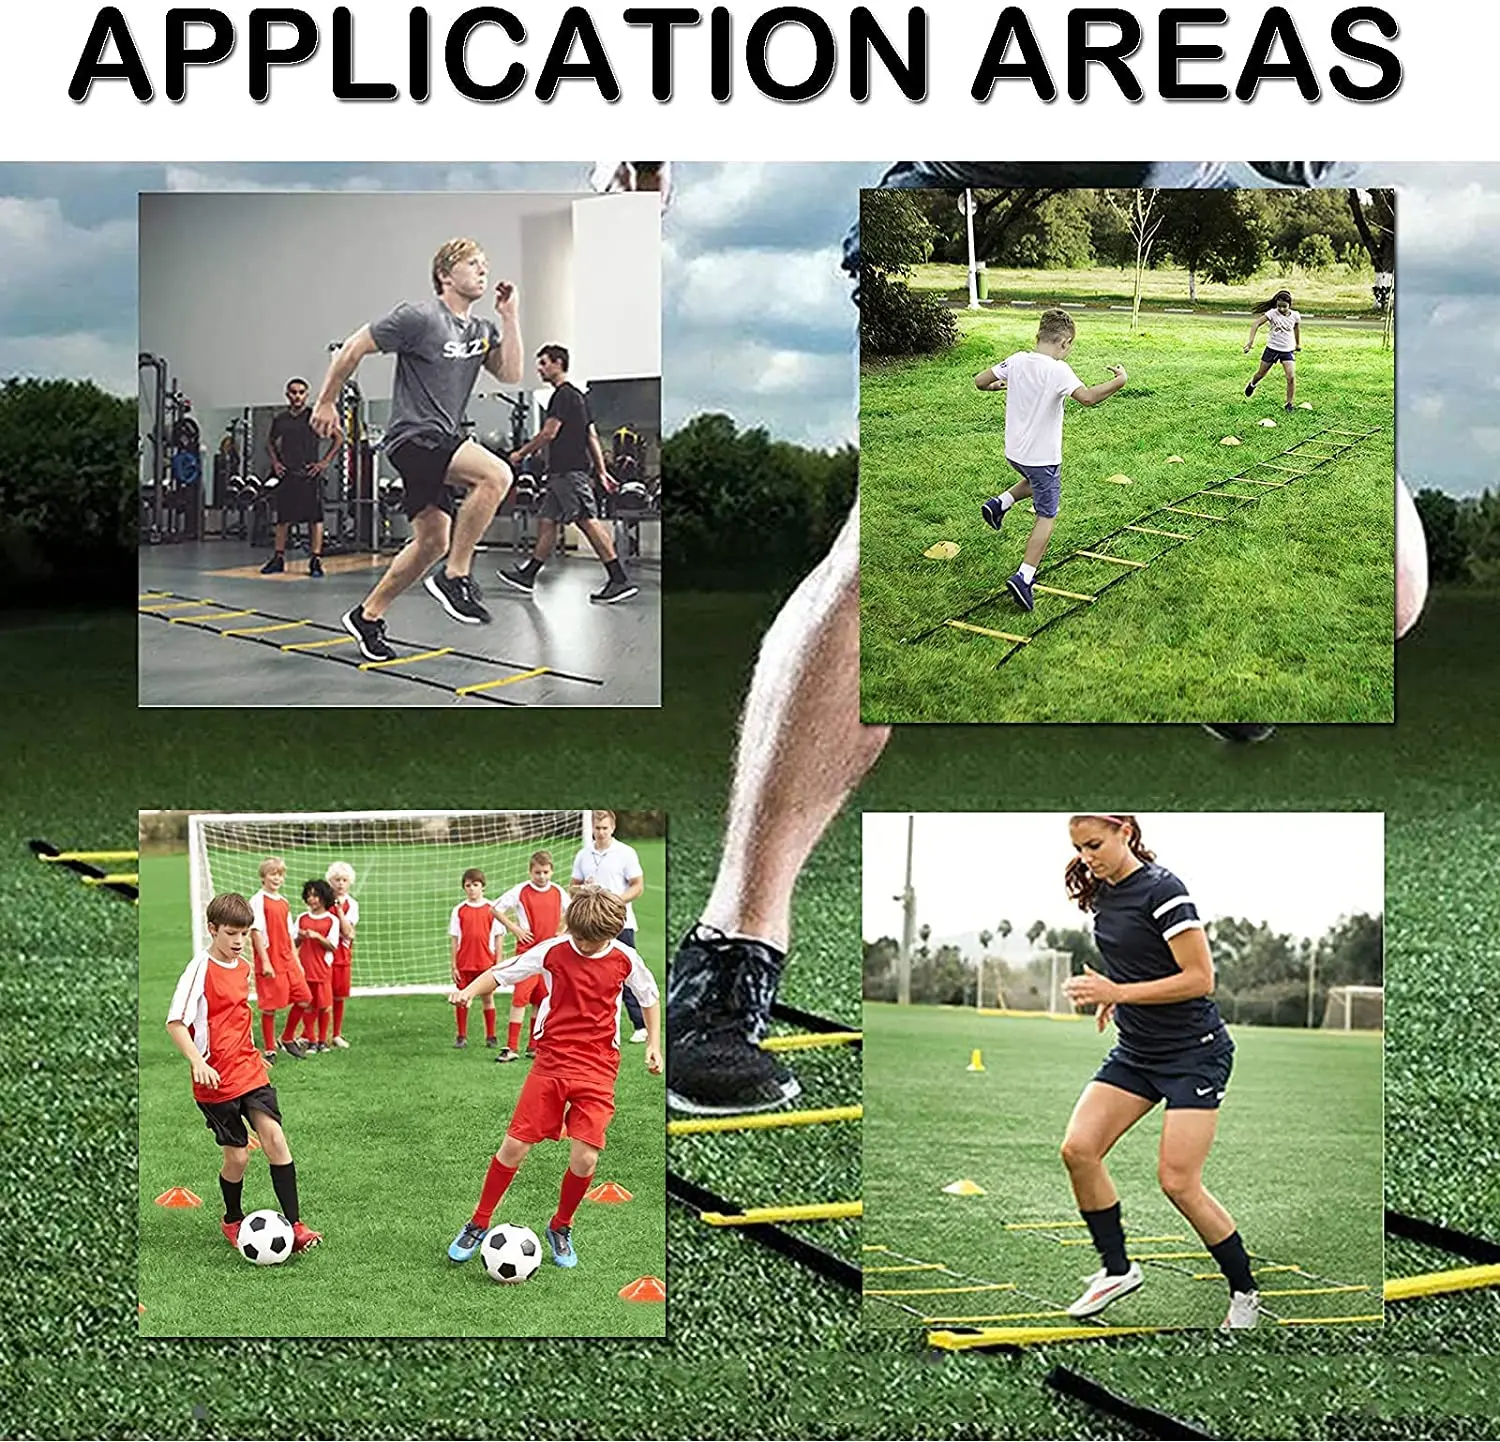 Soccer Training Equipment for Kids with 12 Cones Solo Practice Training Aid Equipment Waist Belt Returner Fits Ball Size 3/4 /5 Football Kick Trainer Control Set with Speed Agility Ladder 